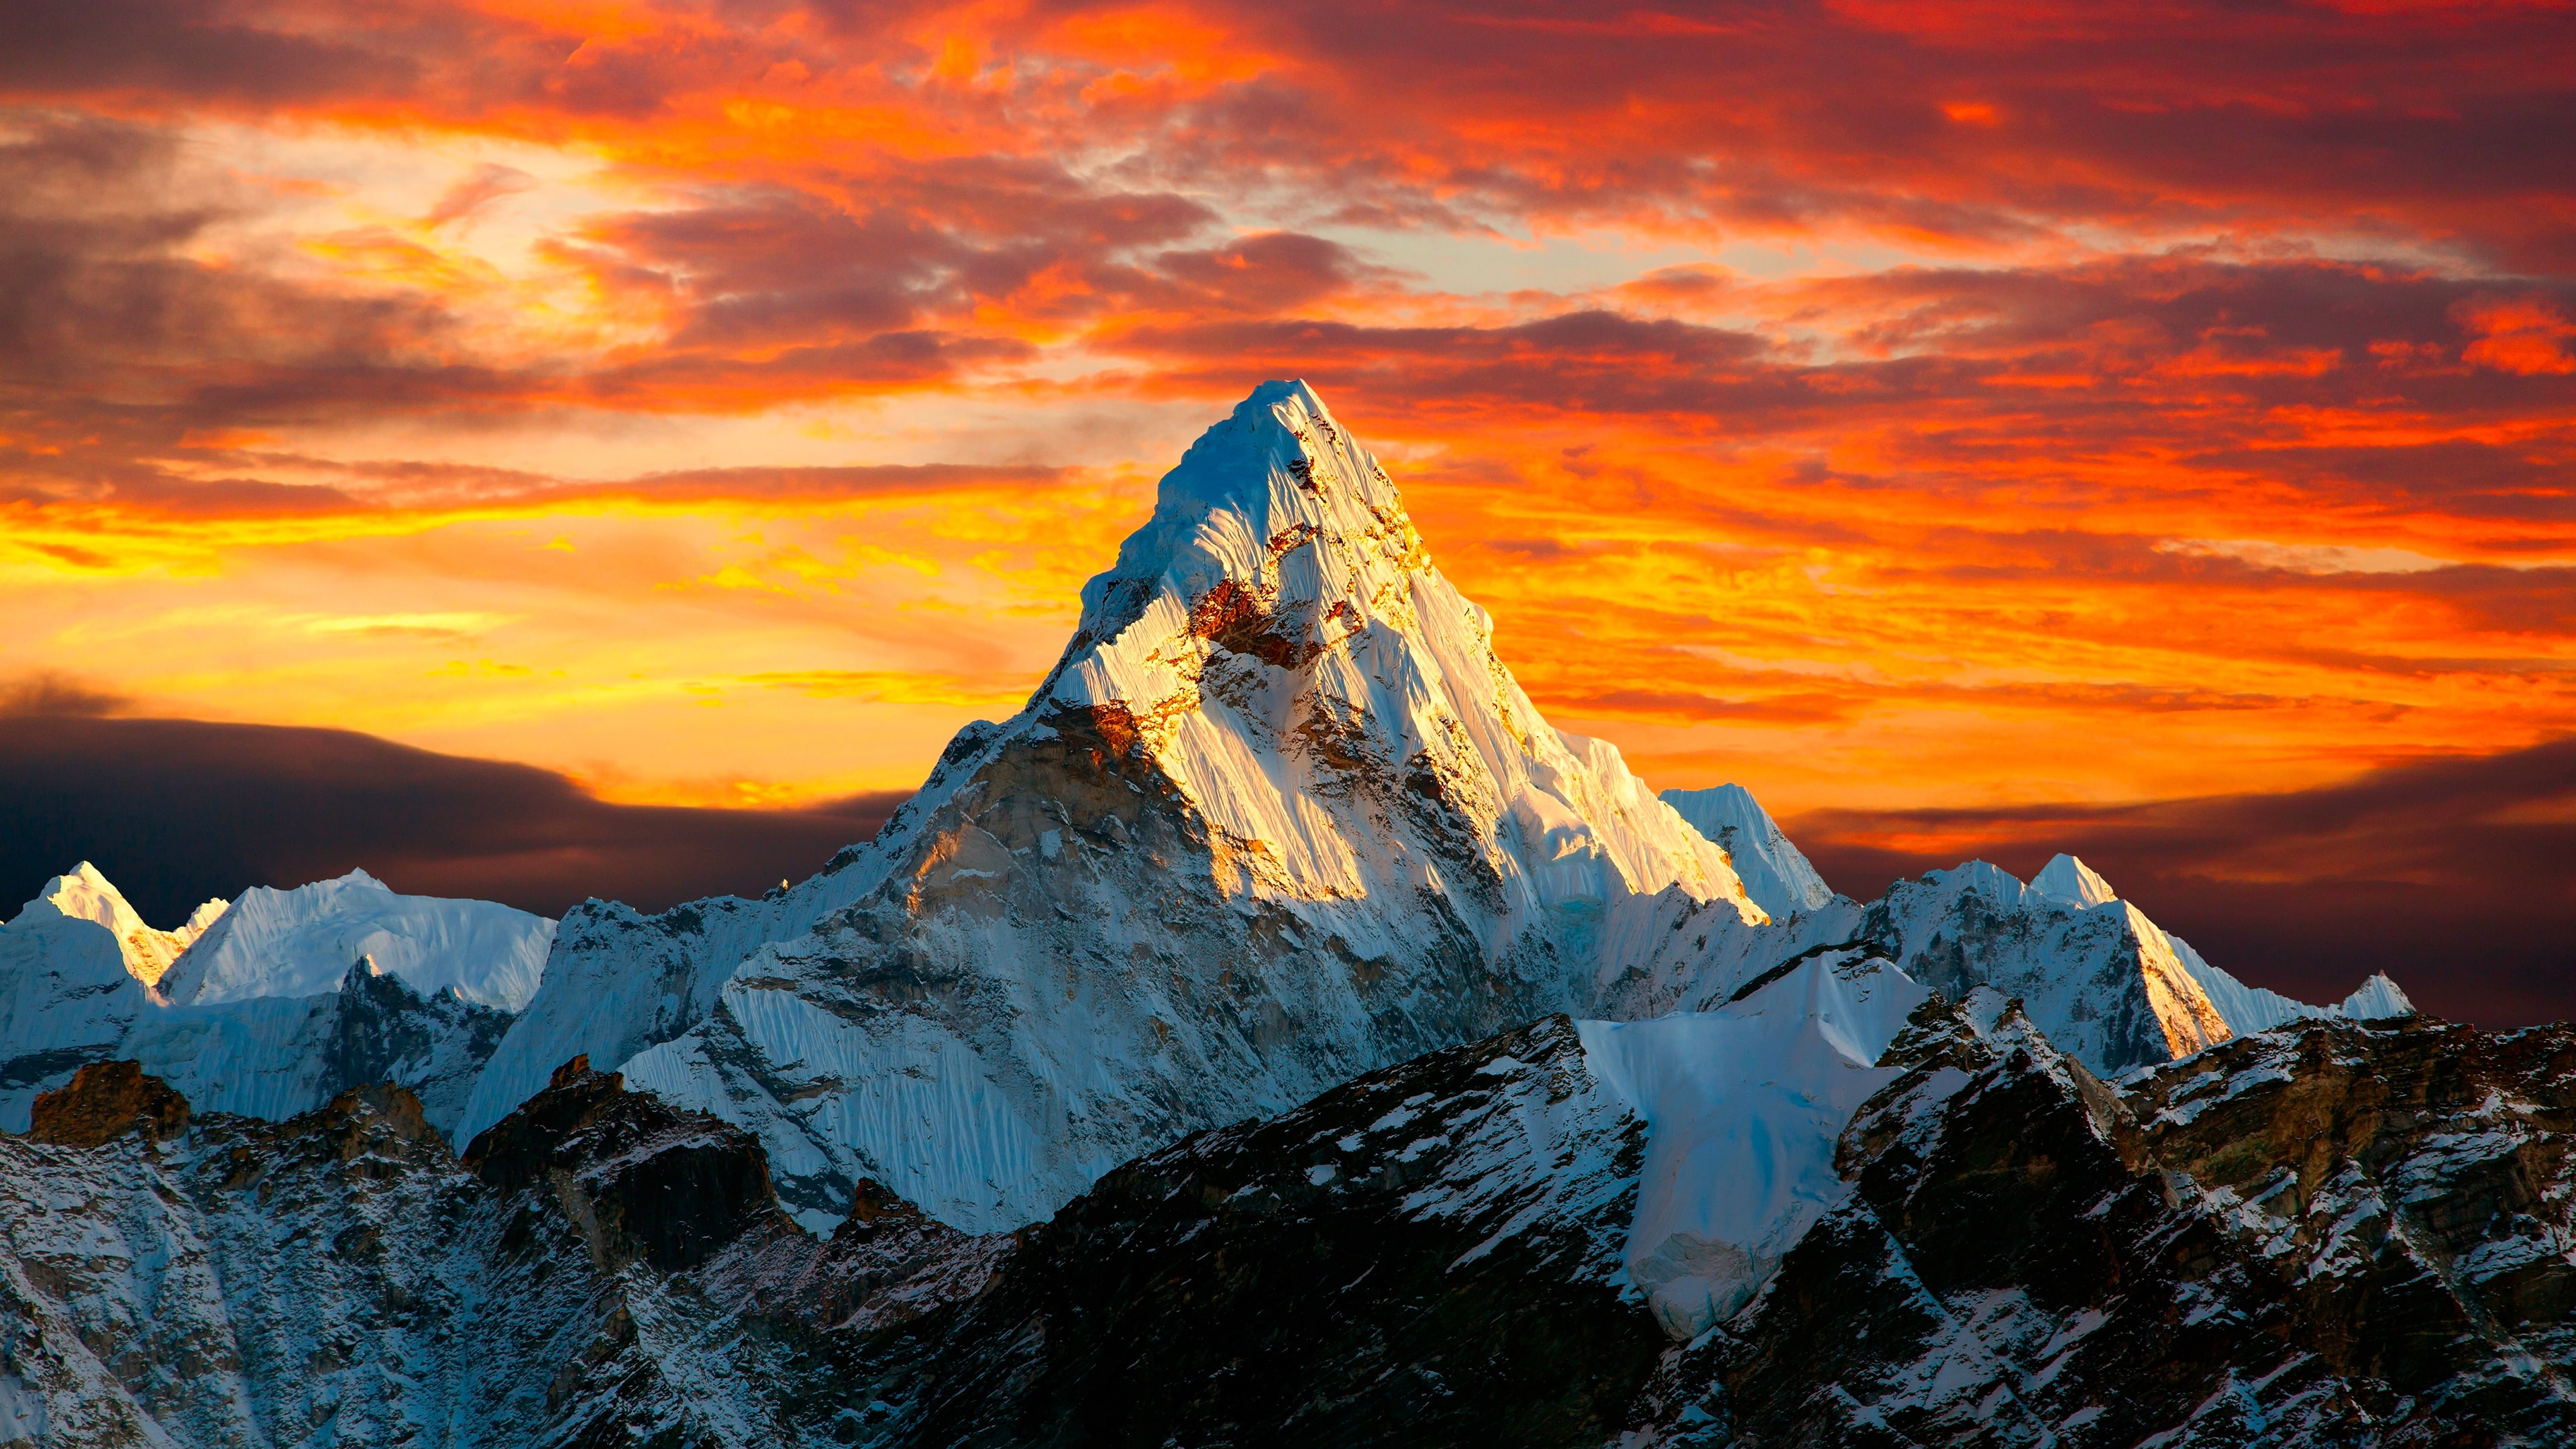 Sunset In Himalayan Mountain Mount Everest Between Nepal And China